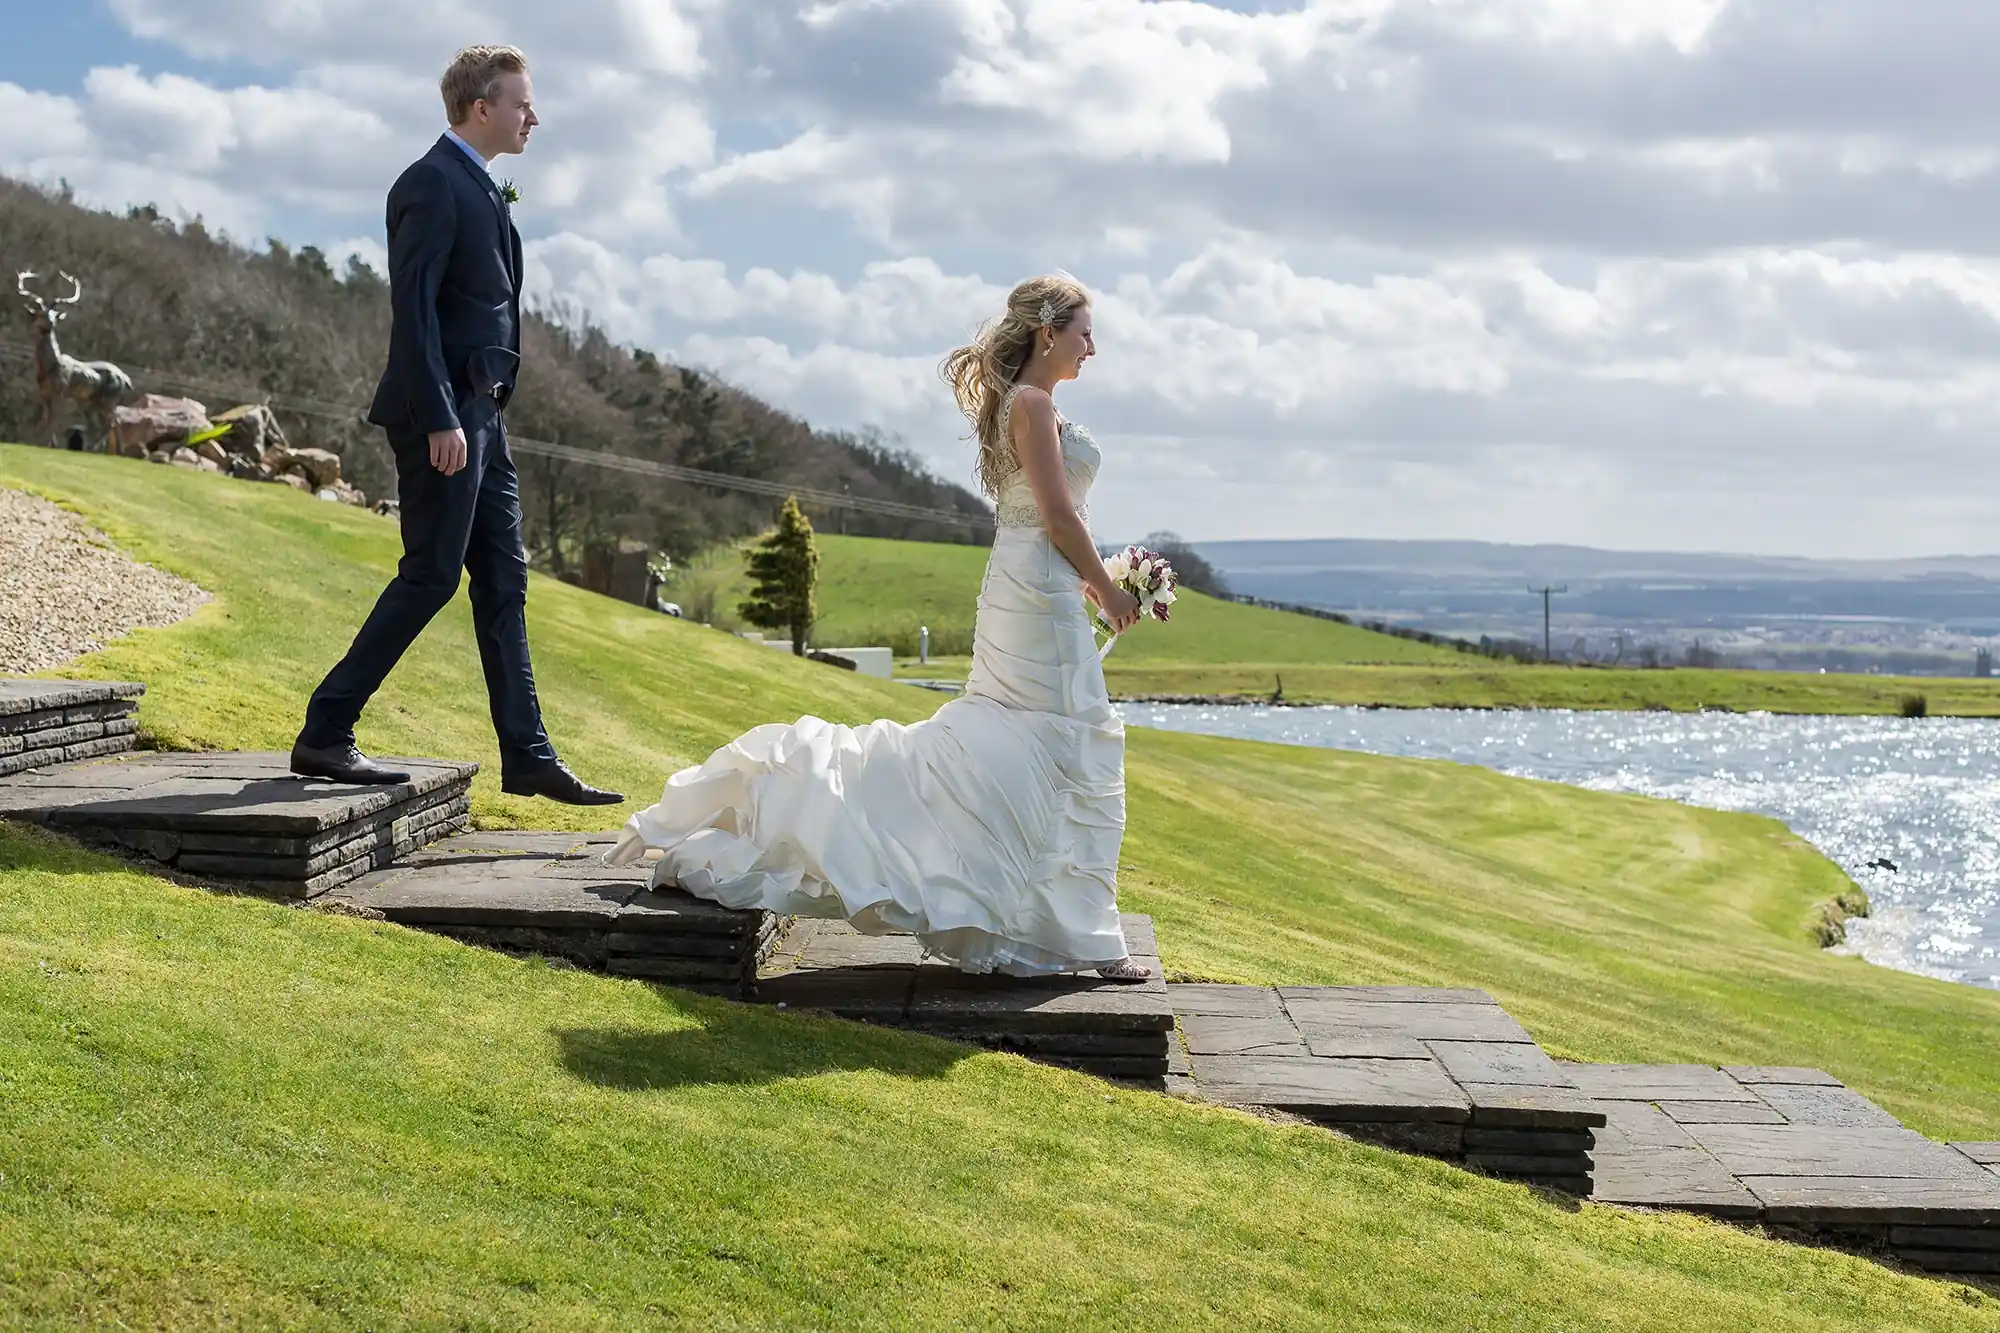 A bride and groom walk along stone steps by a lake with a scenic, hilly backdrop.